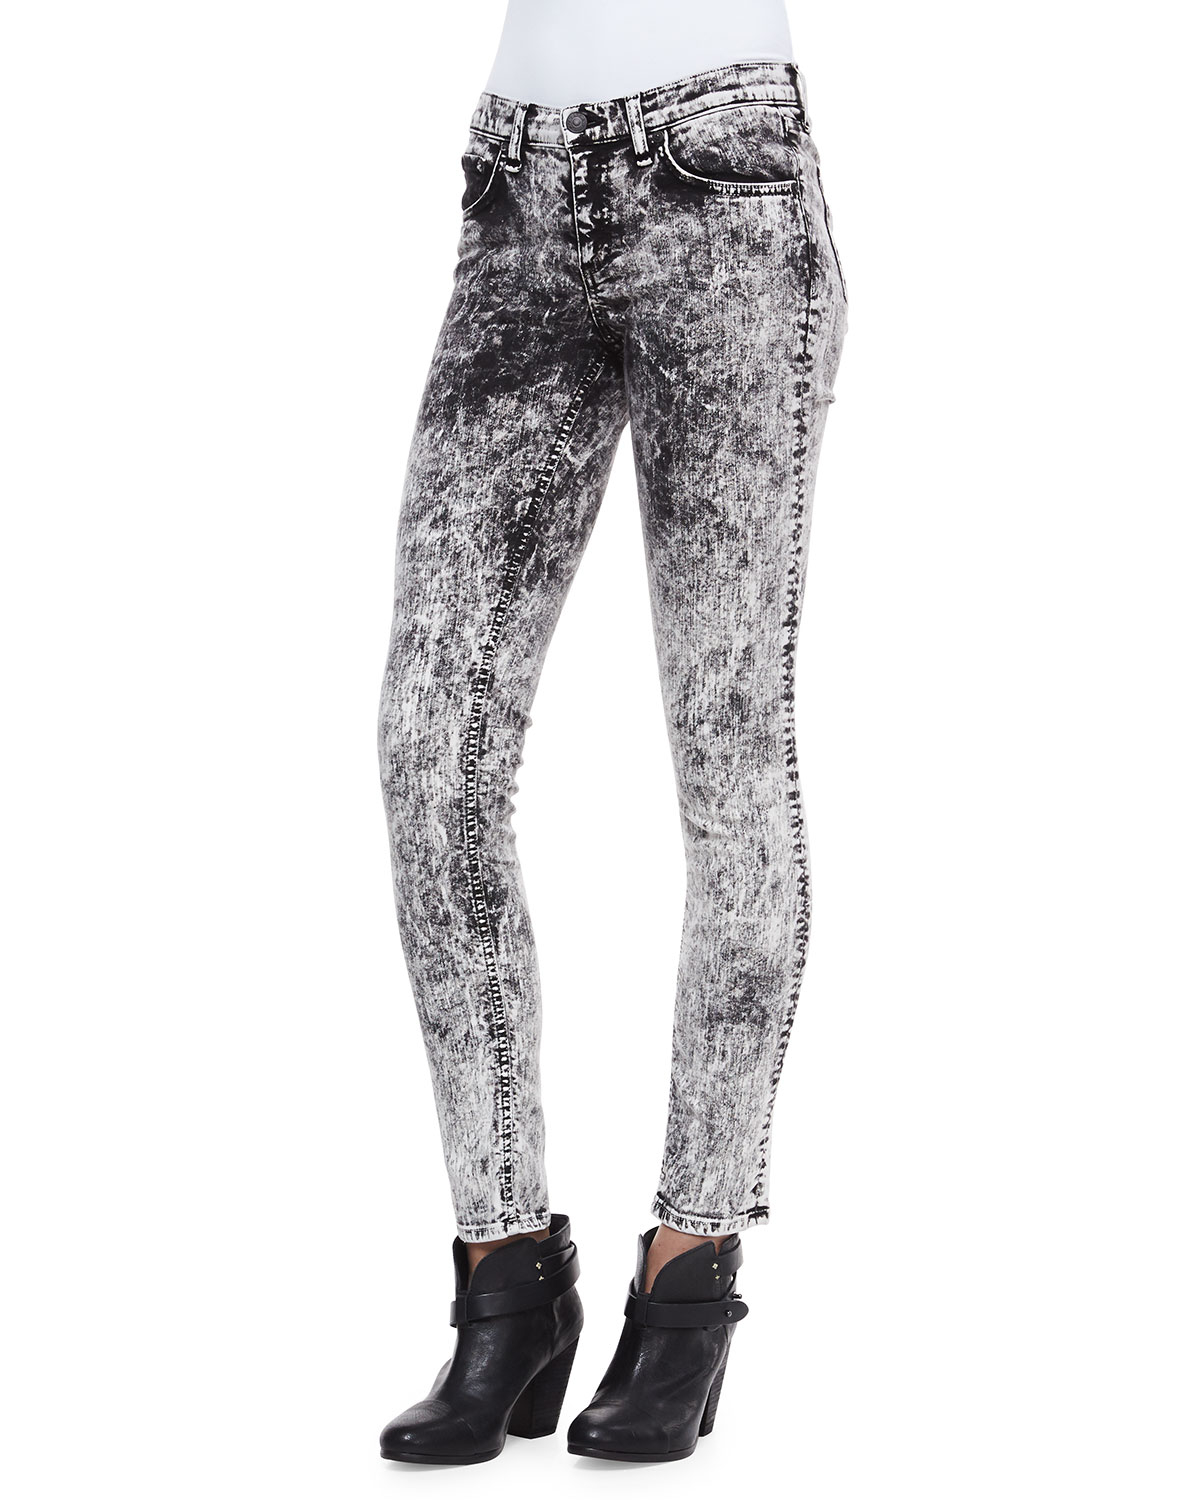 black and white acid wash jeans